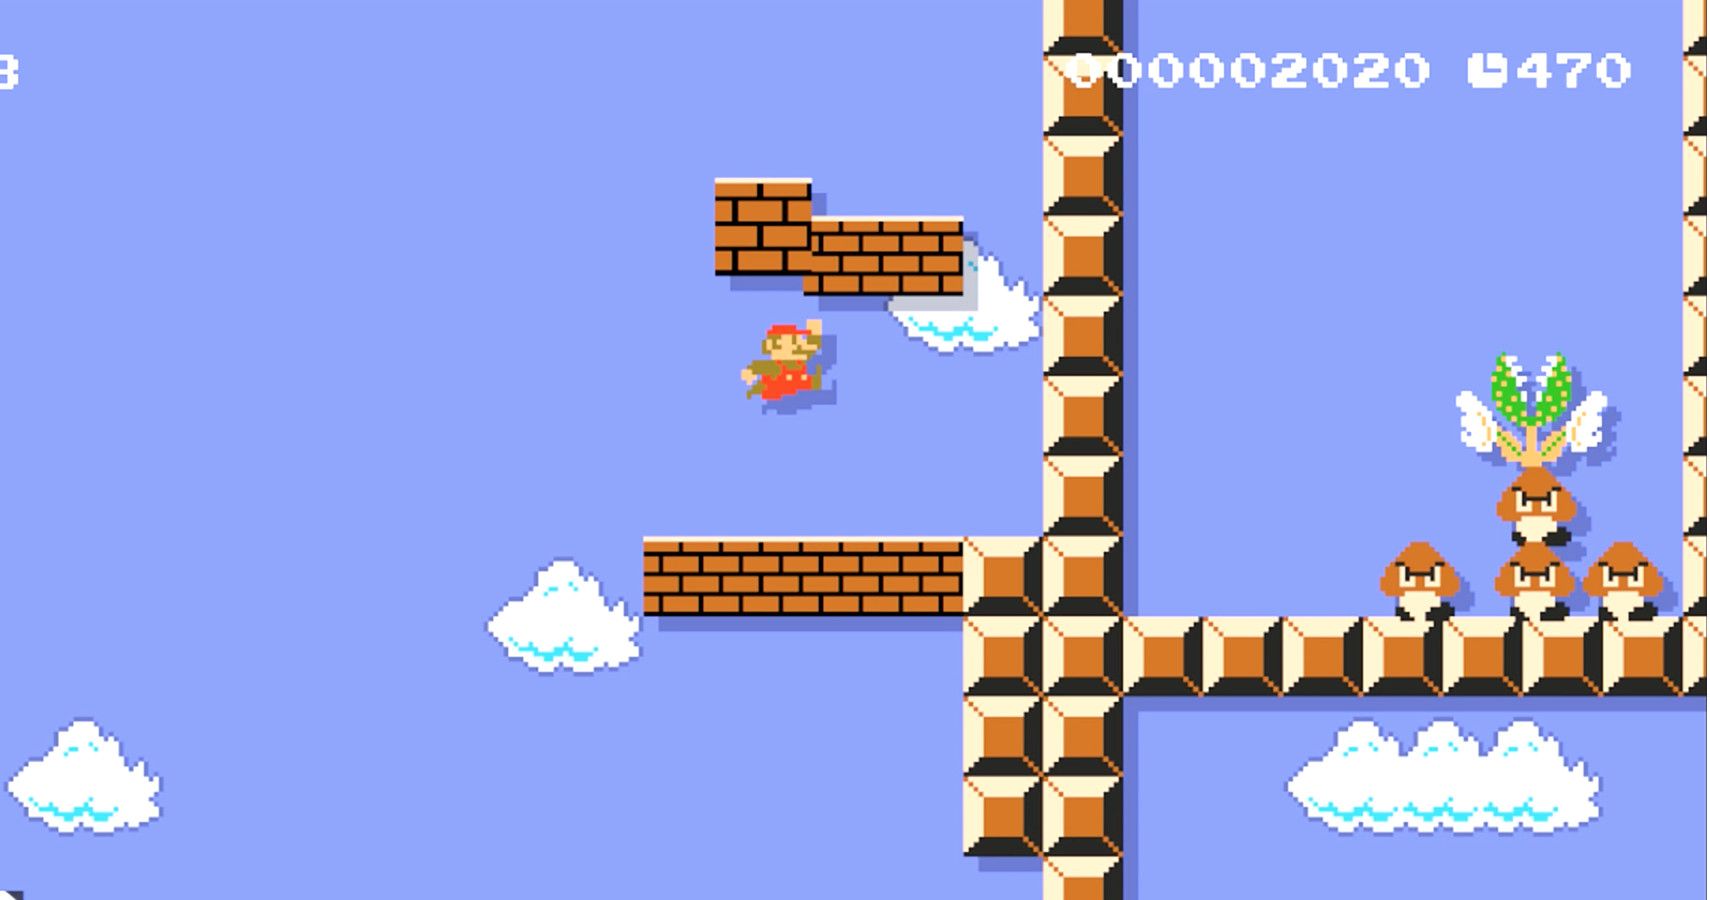 25 Unresolved Mysteries And Plot Holes The Super Mario Series Left Hanging